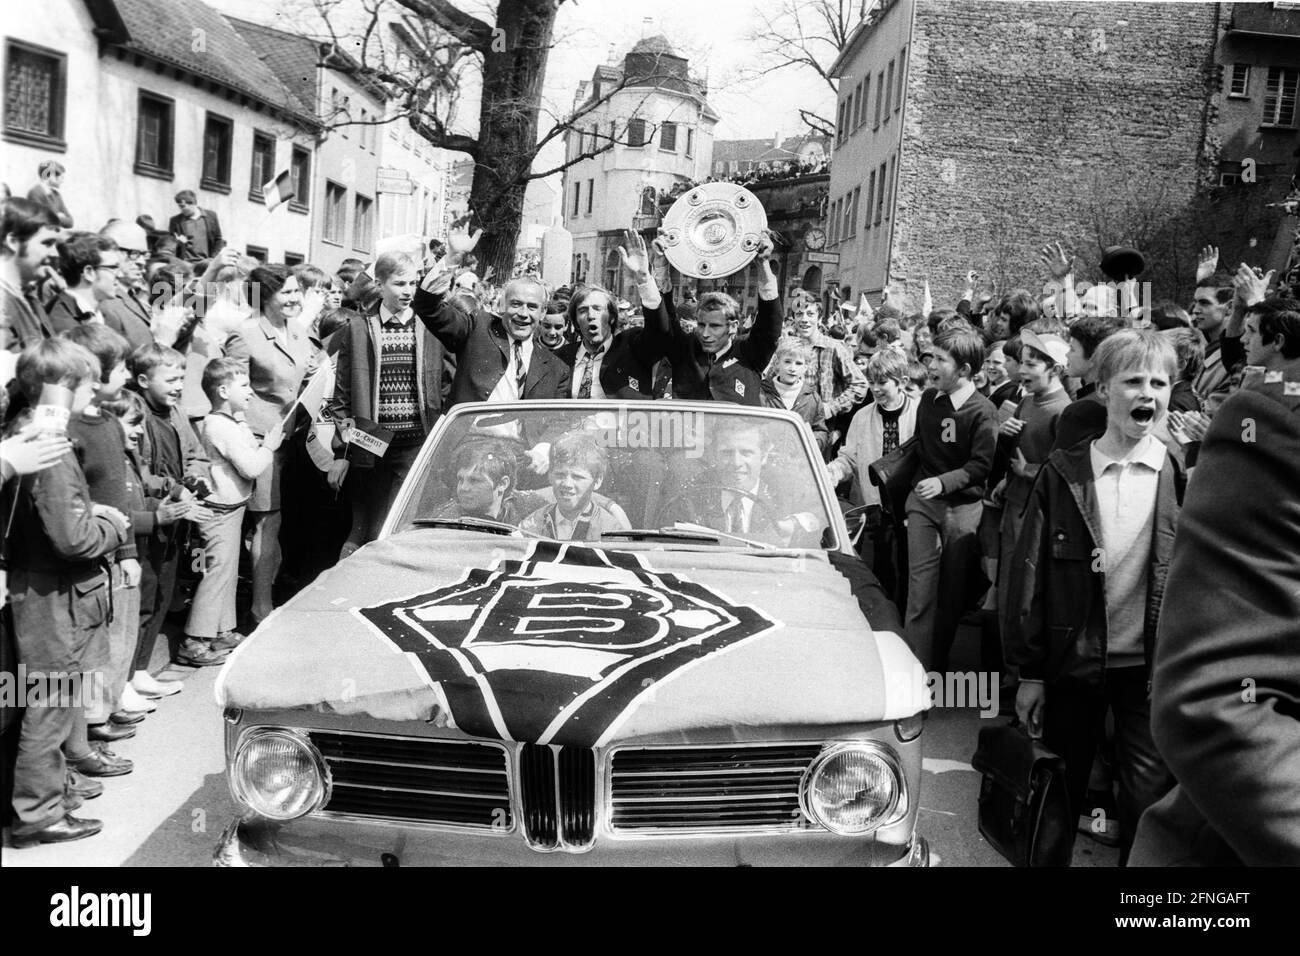 VFL Borussia Mönchengladbach German Football Champion 1969/70 during the drive through the city in the front of the car from the left coach Hennes Weisweiler, Günter Netzer and Berti Vogts with championship trophy.The motorcade is accompanied by many fans. Rec. 05.05.1970. [automated translation] Stock Photo